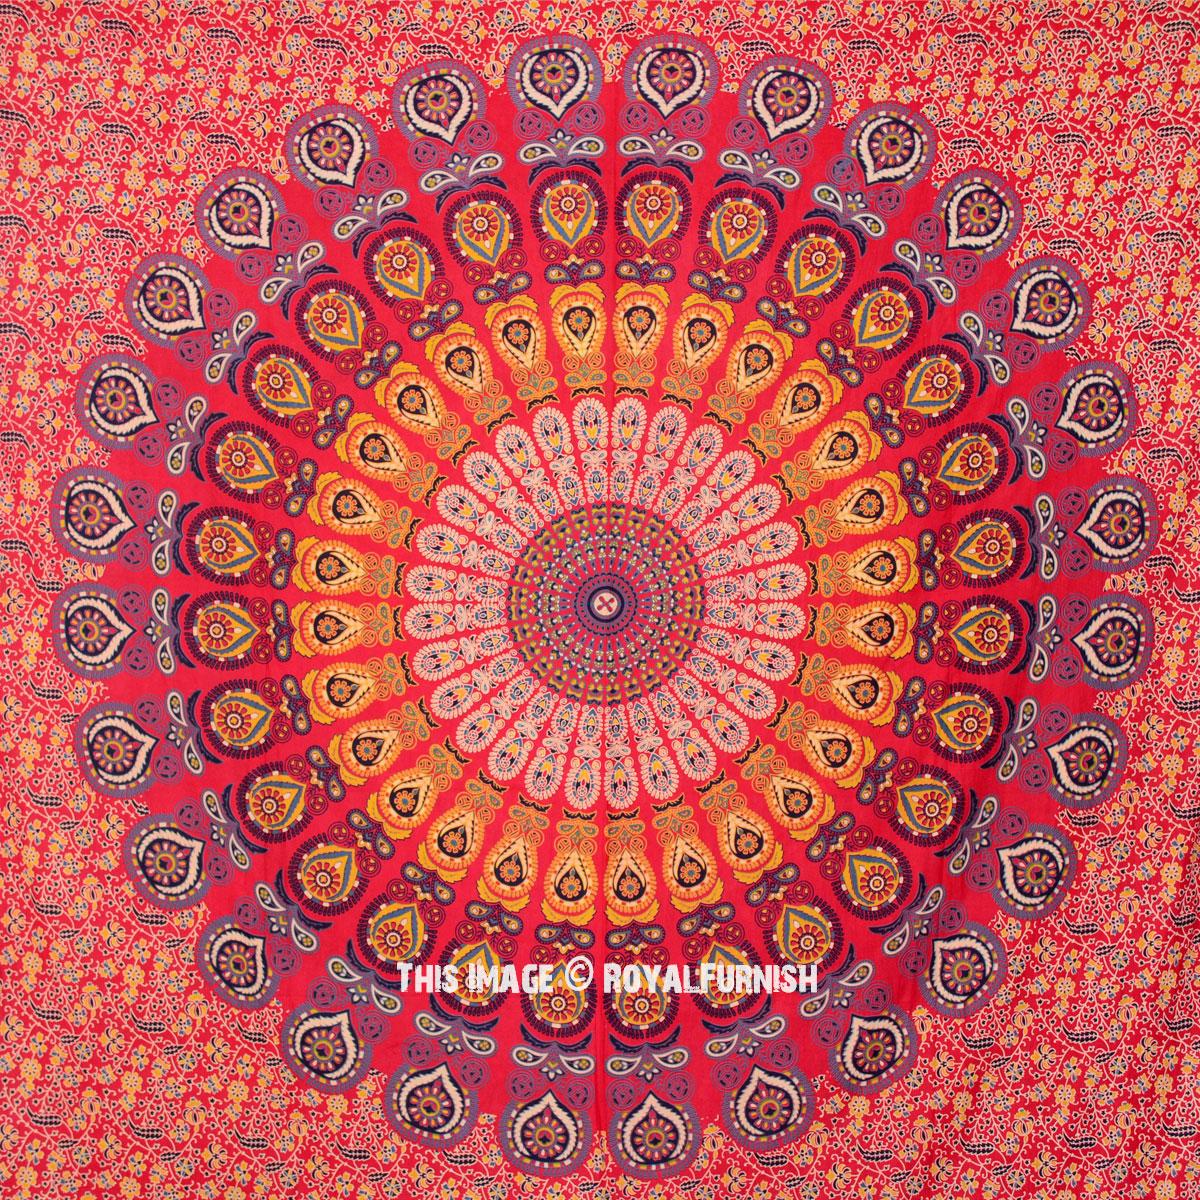 Red Psychedelic Bright Floral Mandala Hippie Tapestry Bedspread